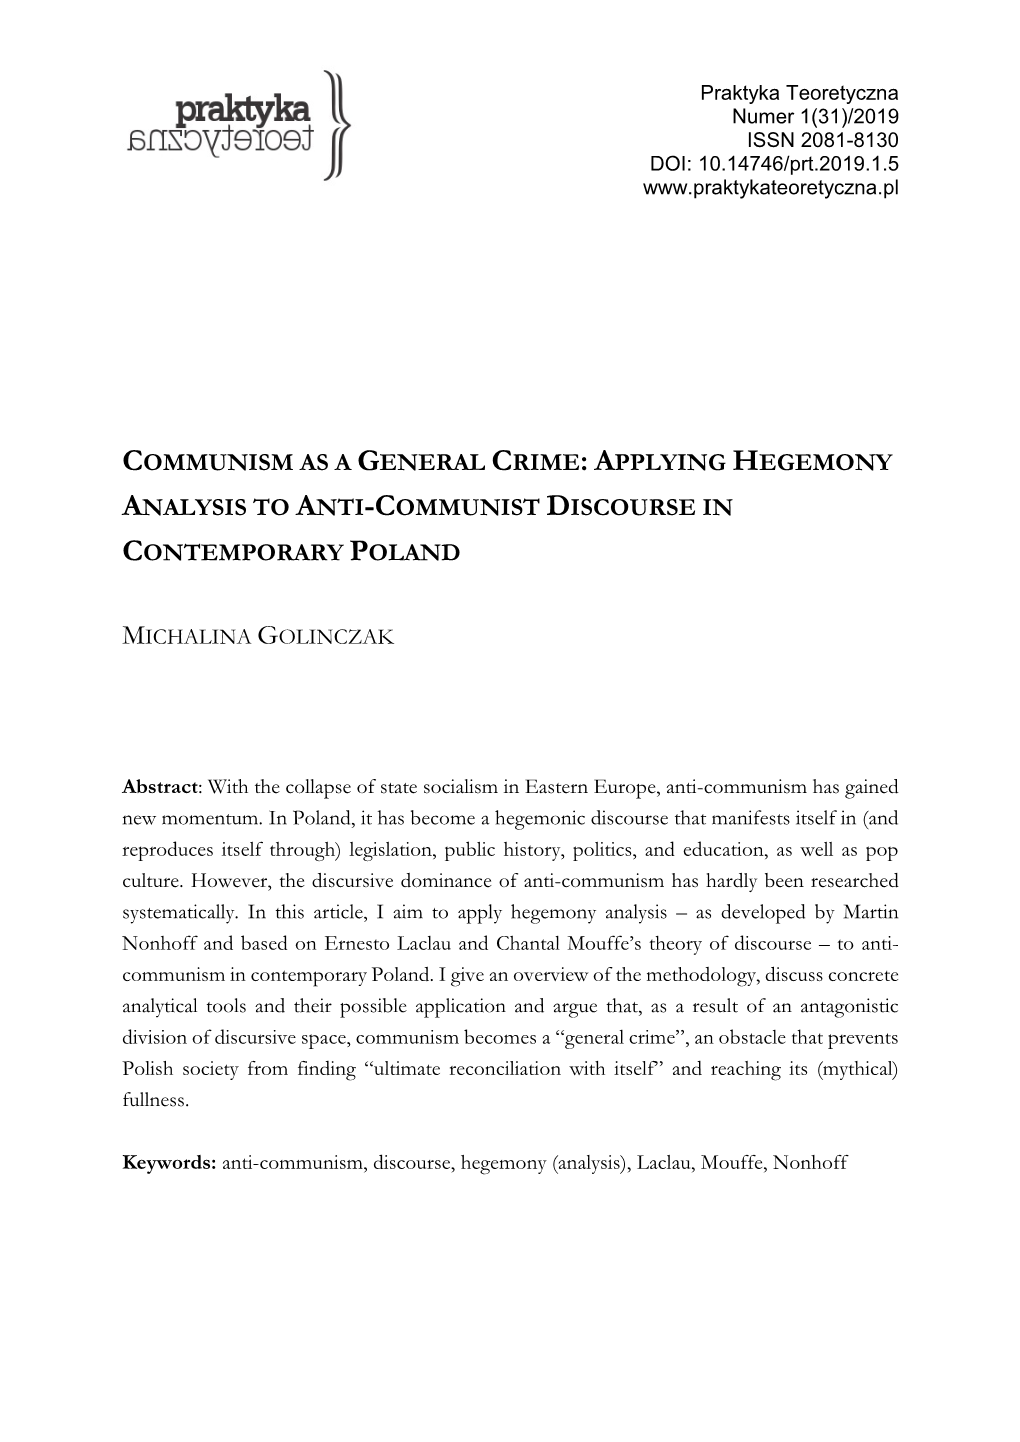 Communism As a General Crime: Applying Hegemony Analysis to Anti-Communist Discourse in Contemporary Poland